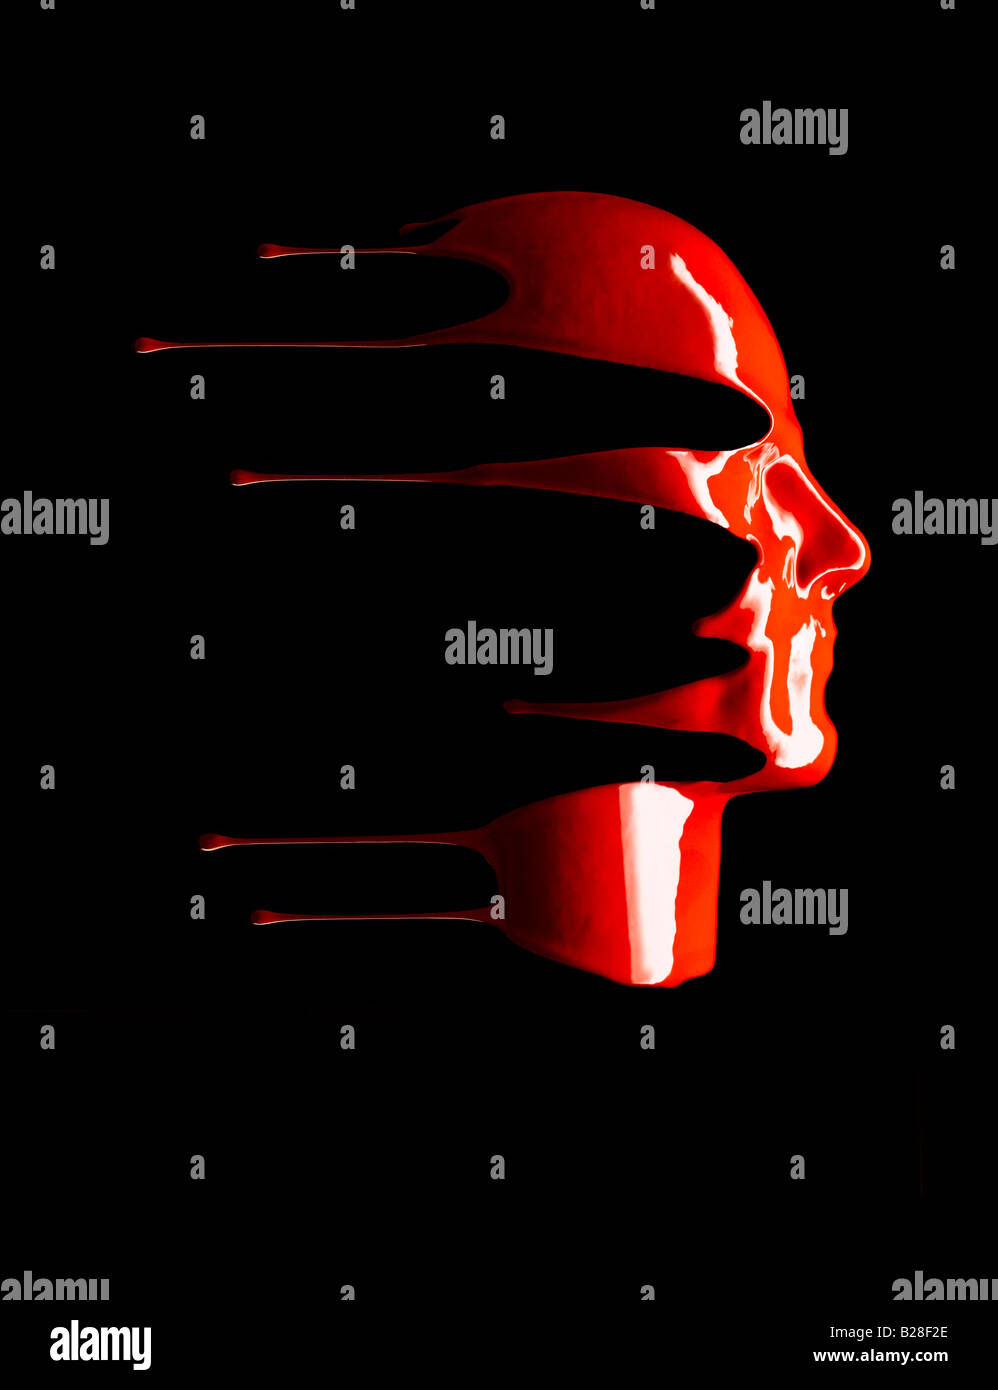 Red liquid dripping down a face. Stock Photo